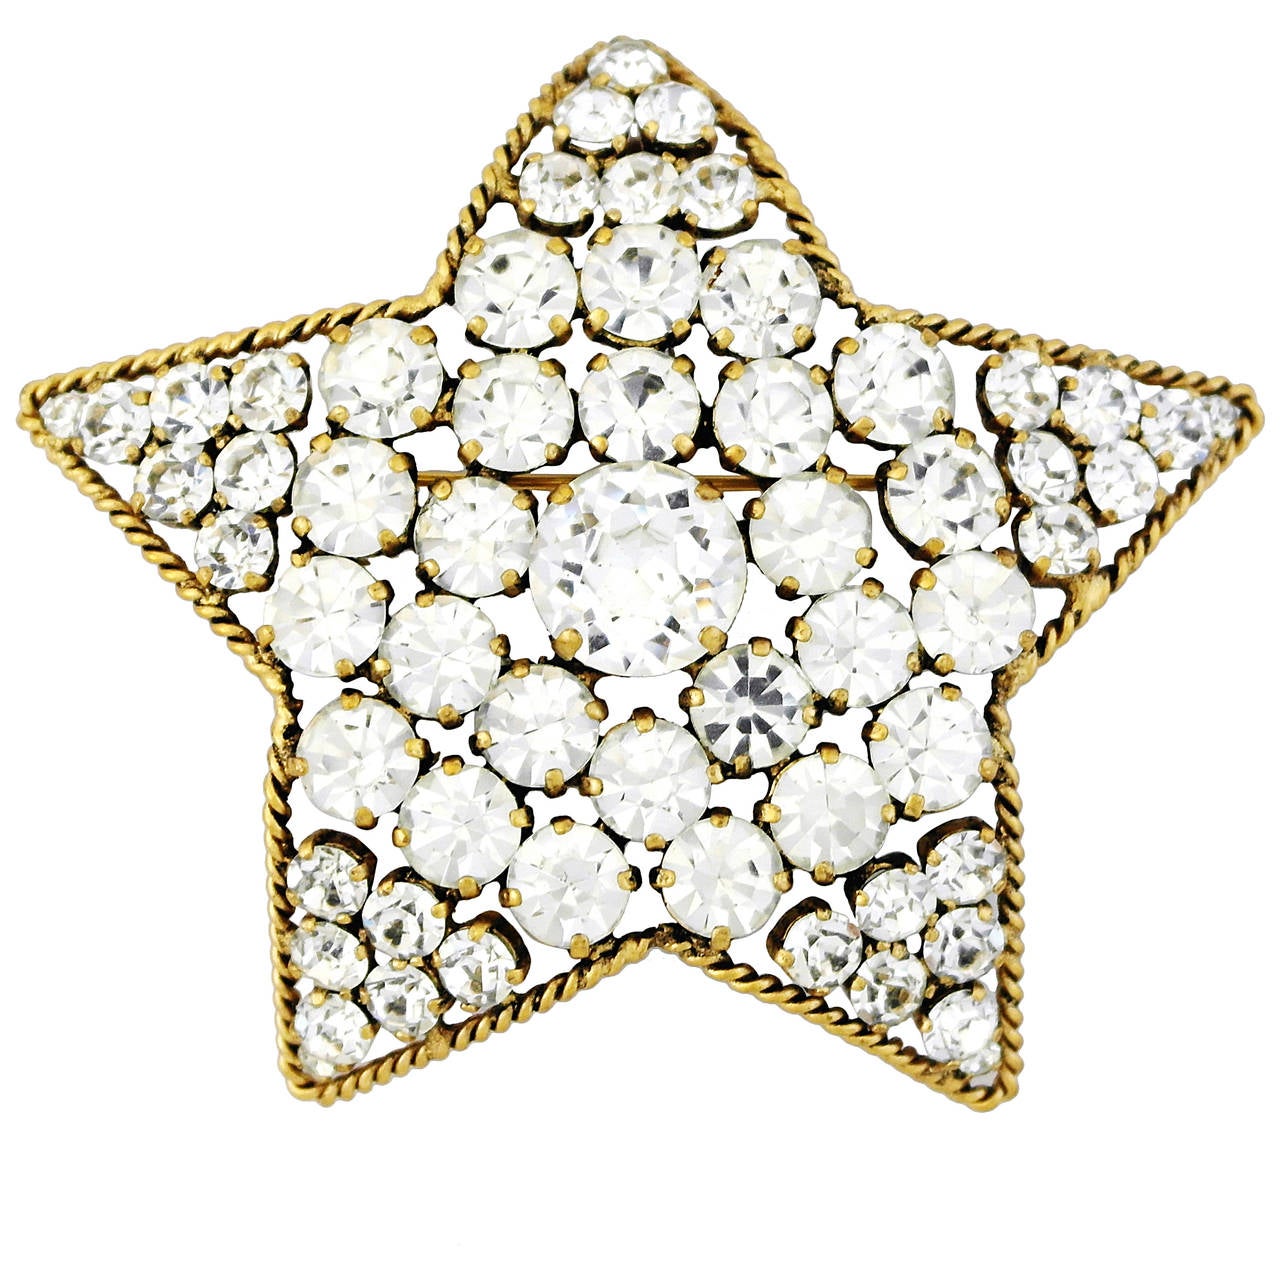 Rare 1983 Chanel Star Shaped Brooch/Pendant with Brilliant Rhinestones For Sale